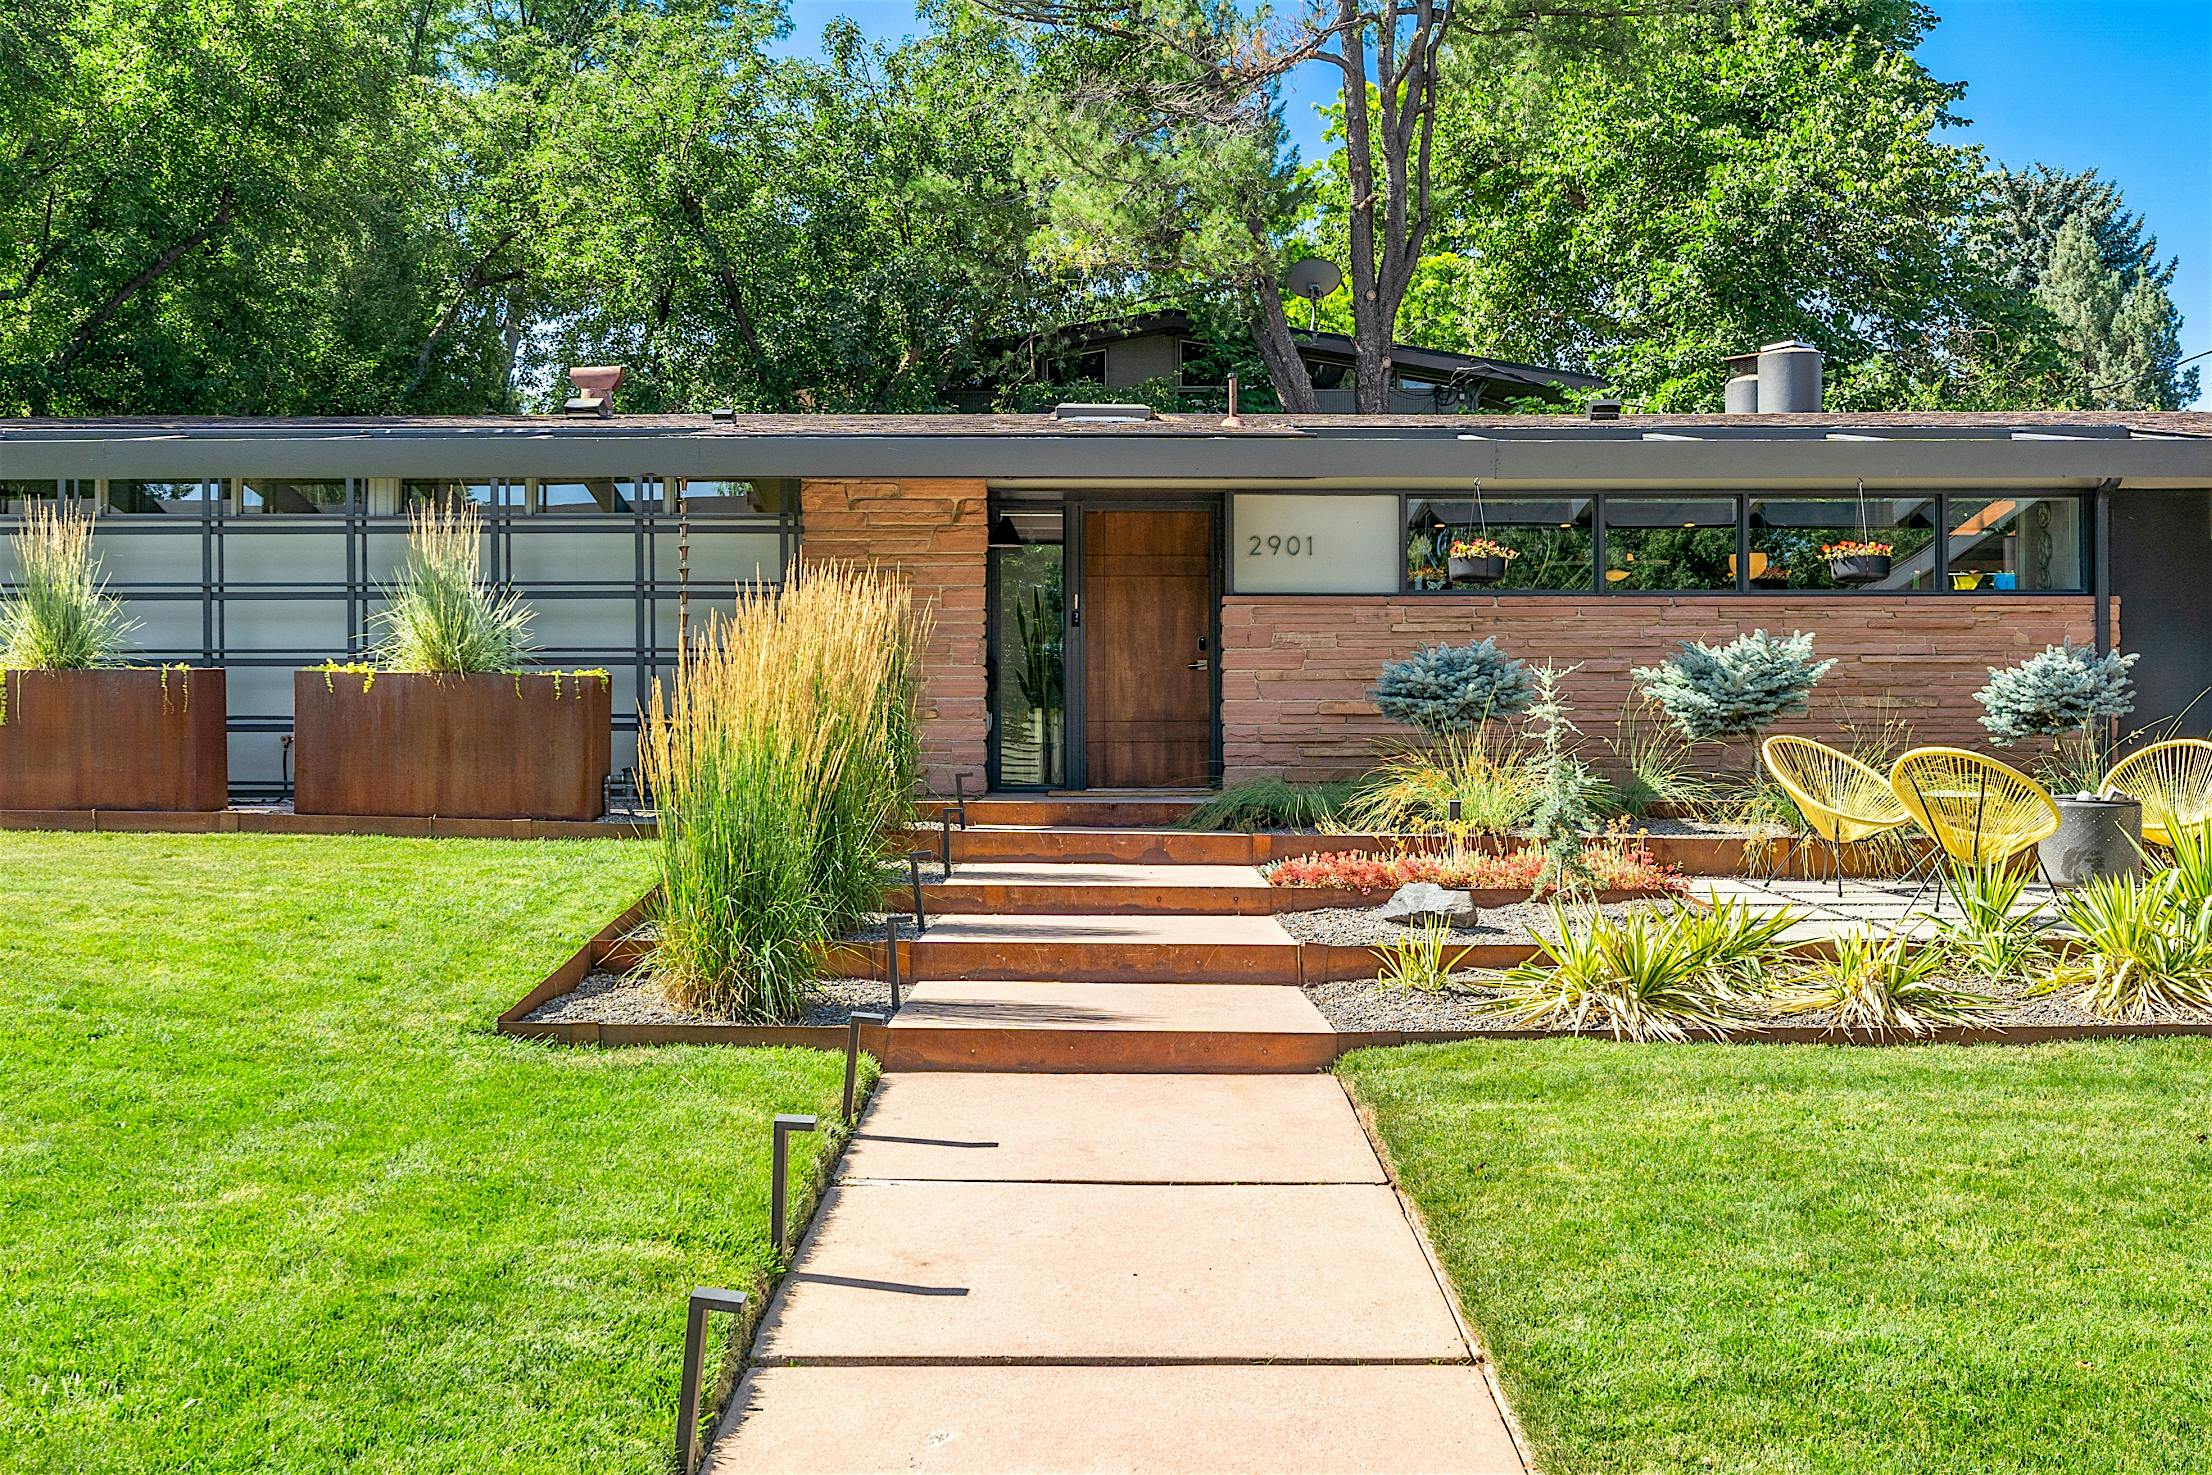 Mid-Century Modern Home in Arapahoe Acres Colorado remodeled with NanaWall folding door systems